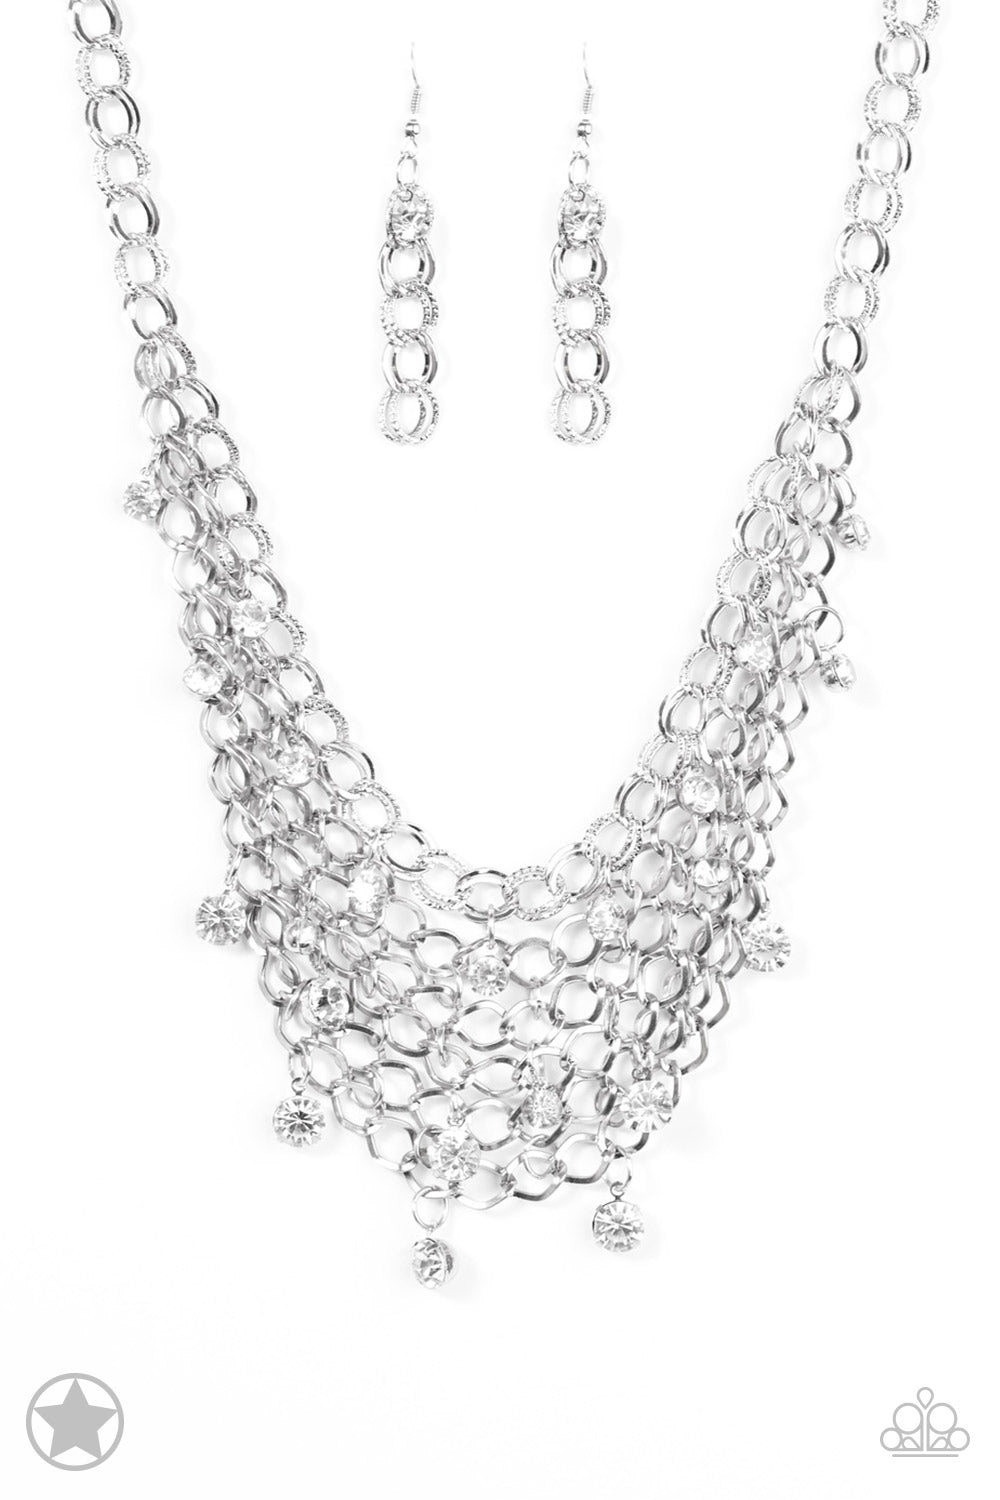 Fishing for Compliments - silver - Paparazzi necklace